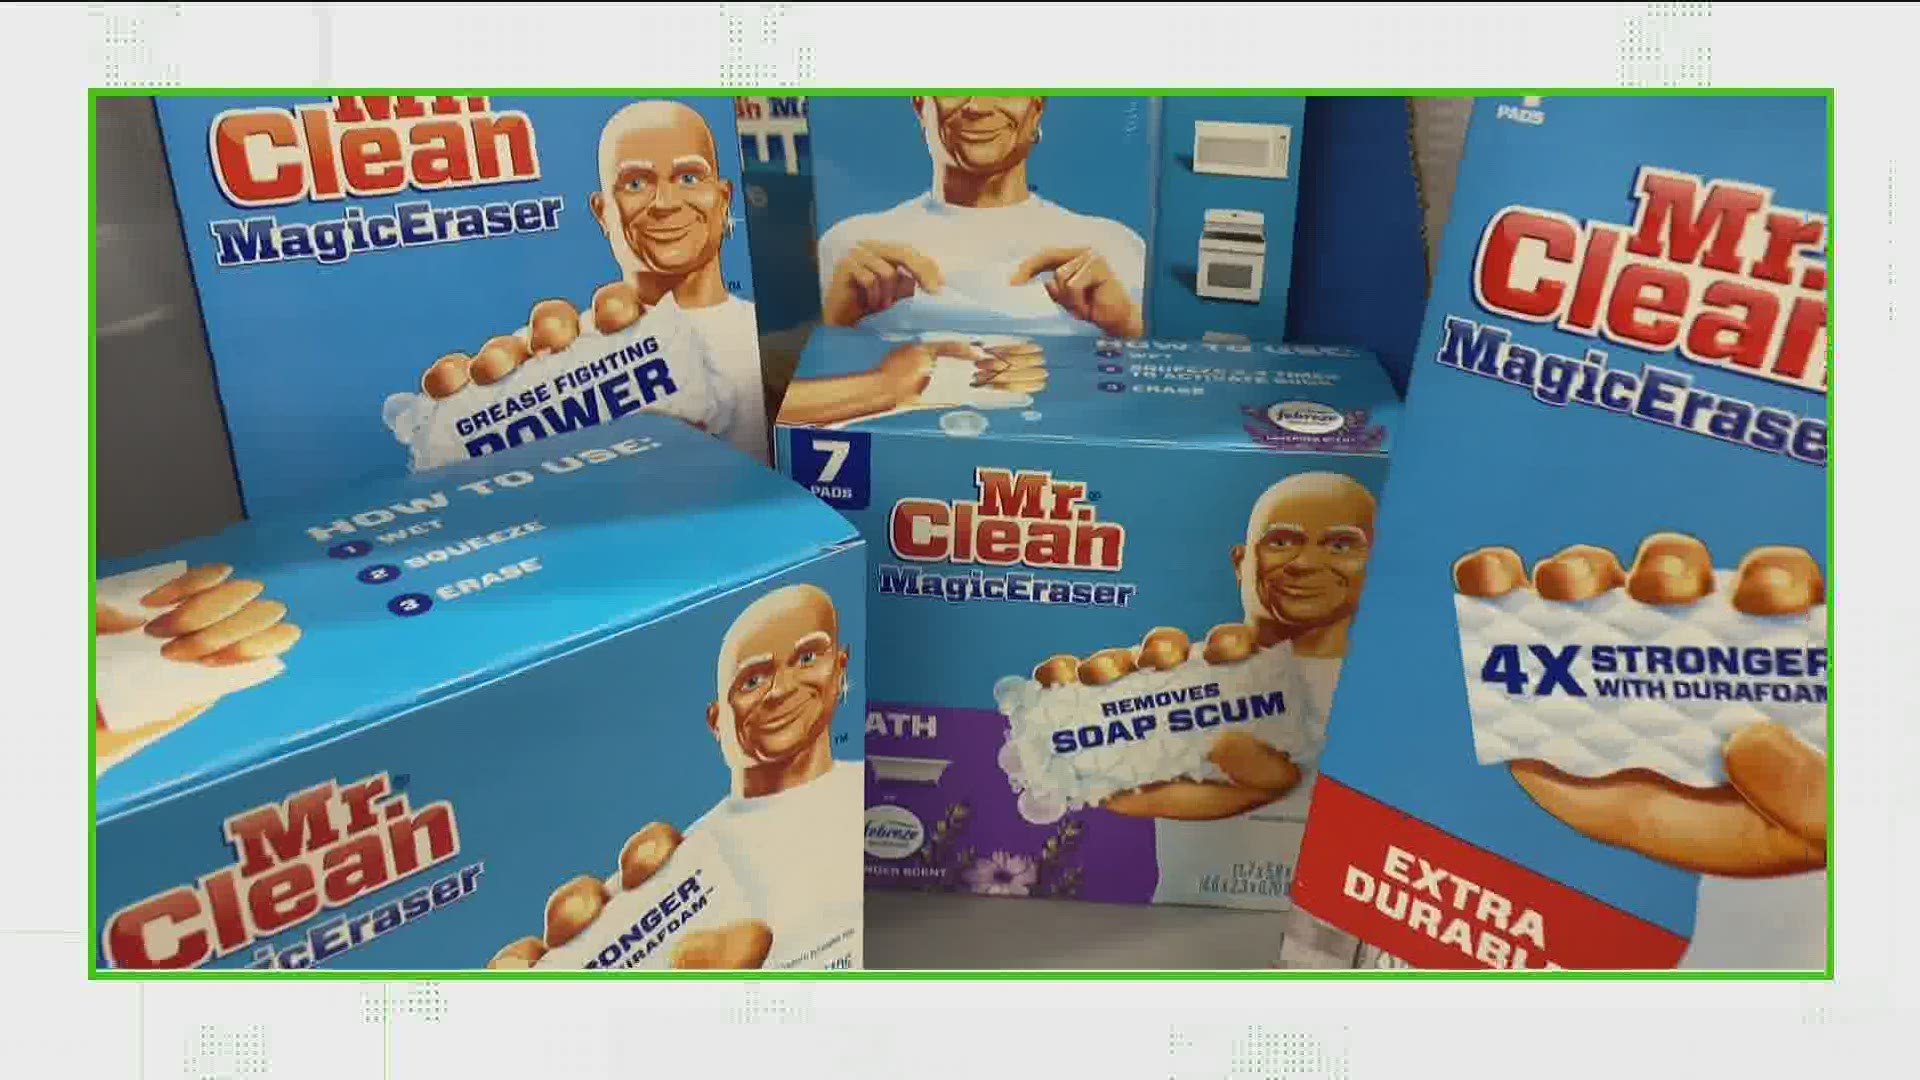 No, it's not safe to use Mr. Clean magic eraser on teeth